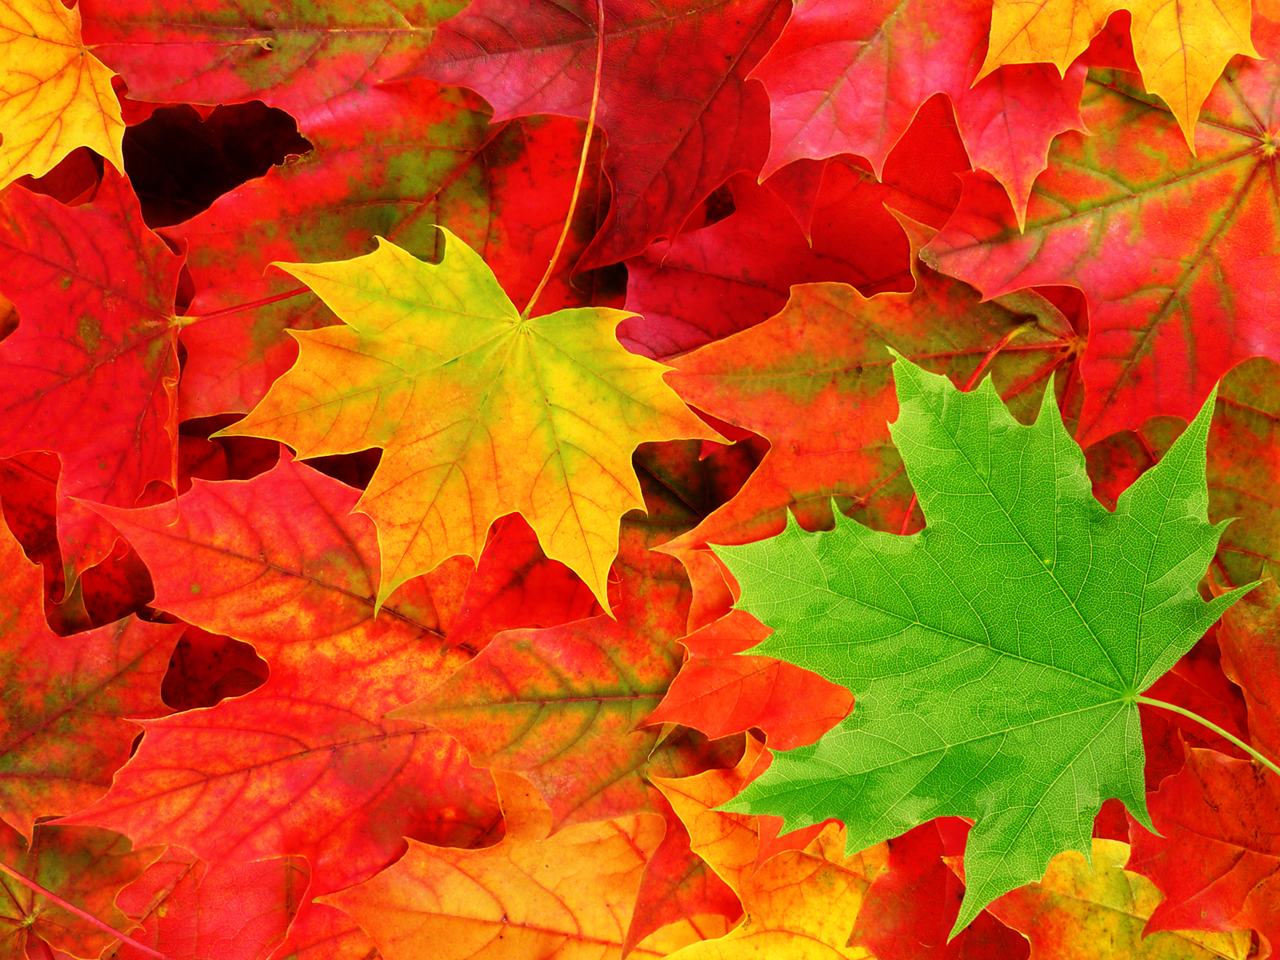 Autumn Leaves Wallpaper HD Background Image Photos